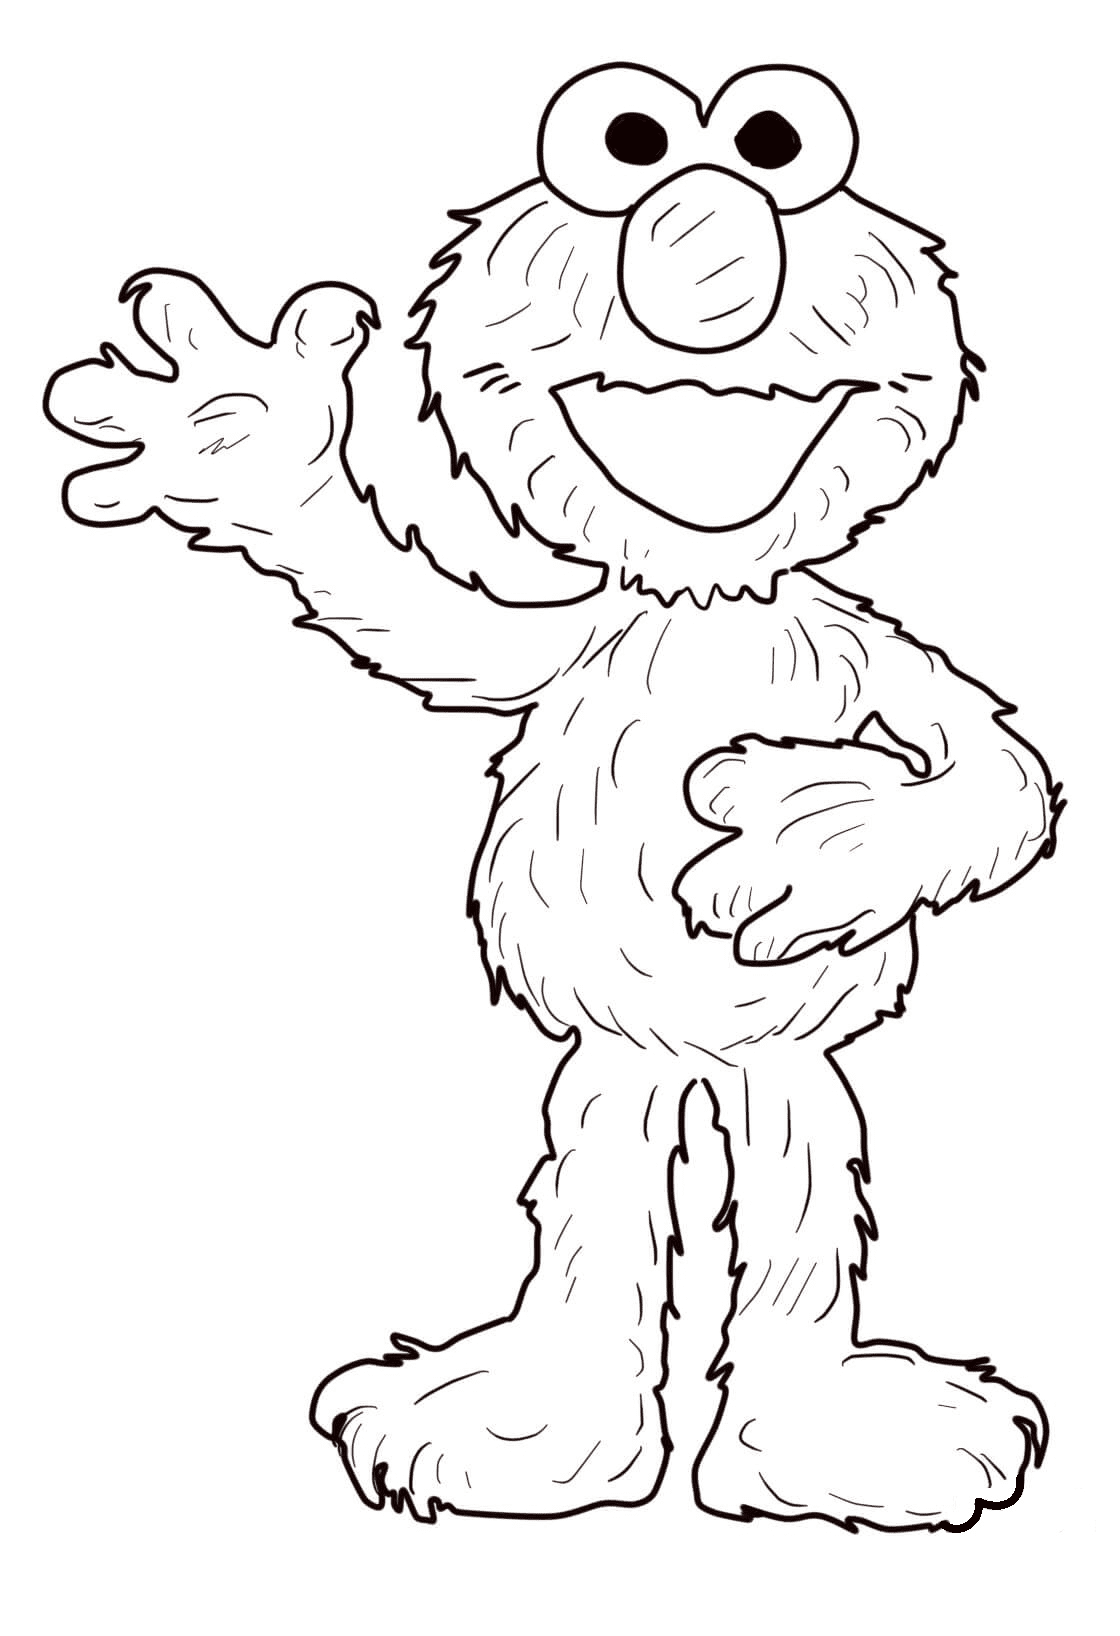 Elmo Waving Hello Coloring Pages